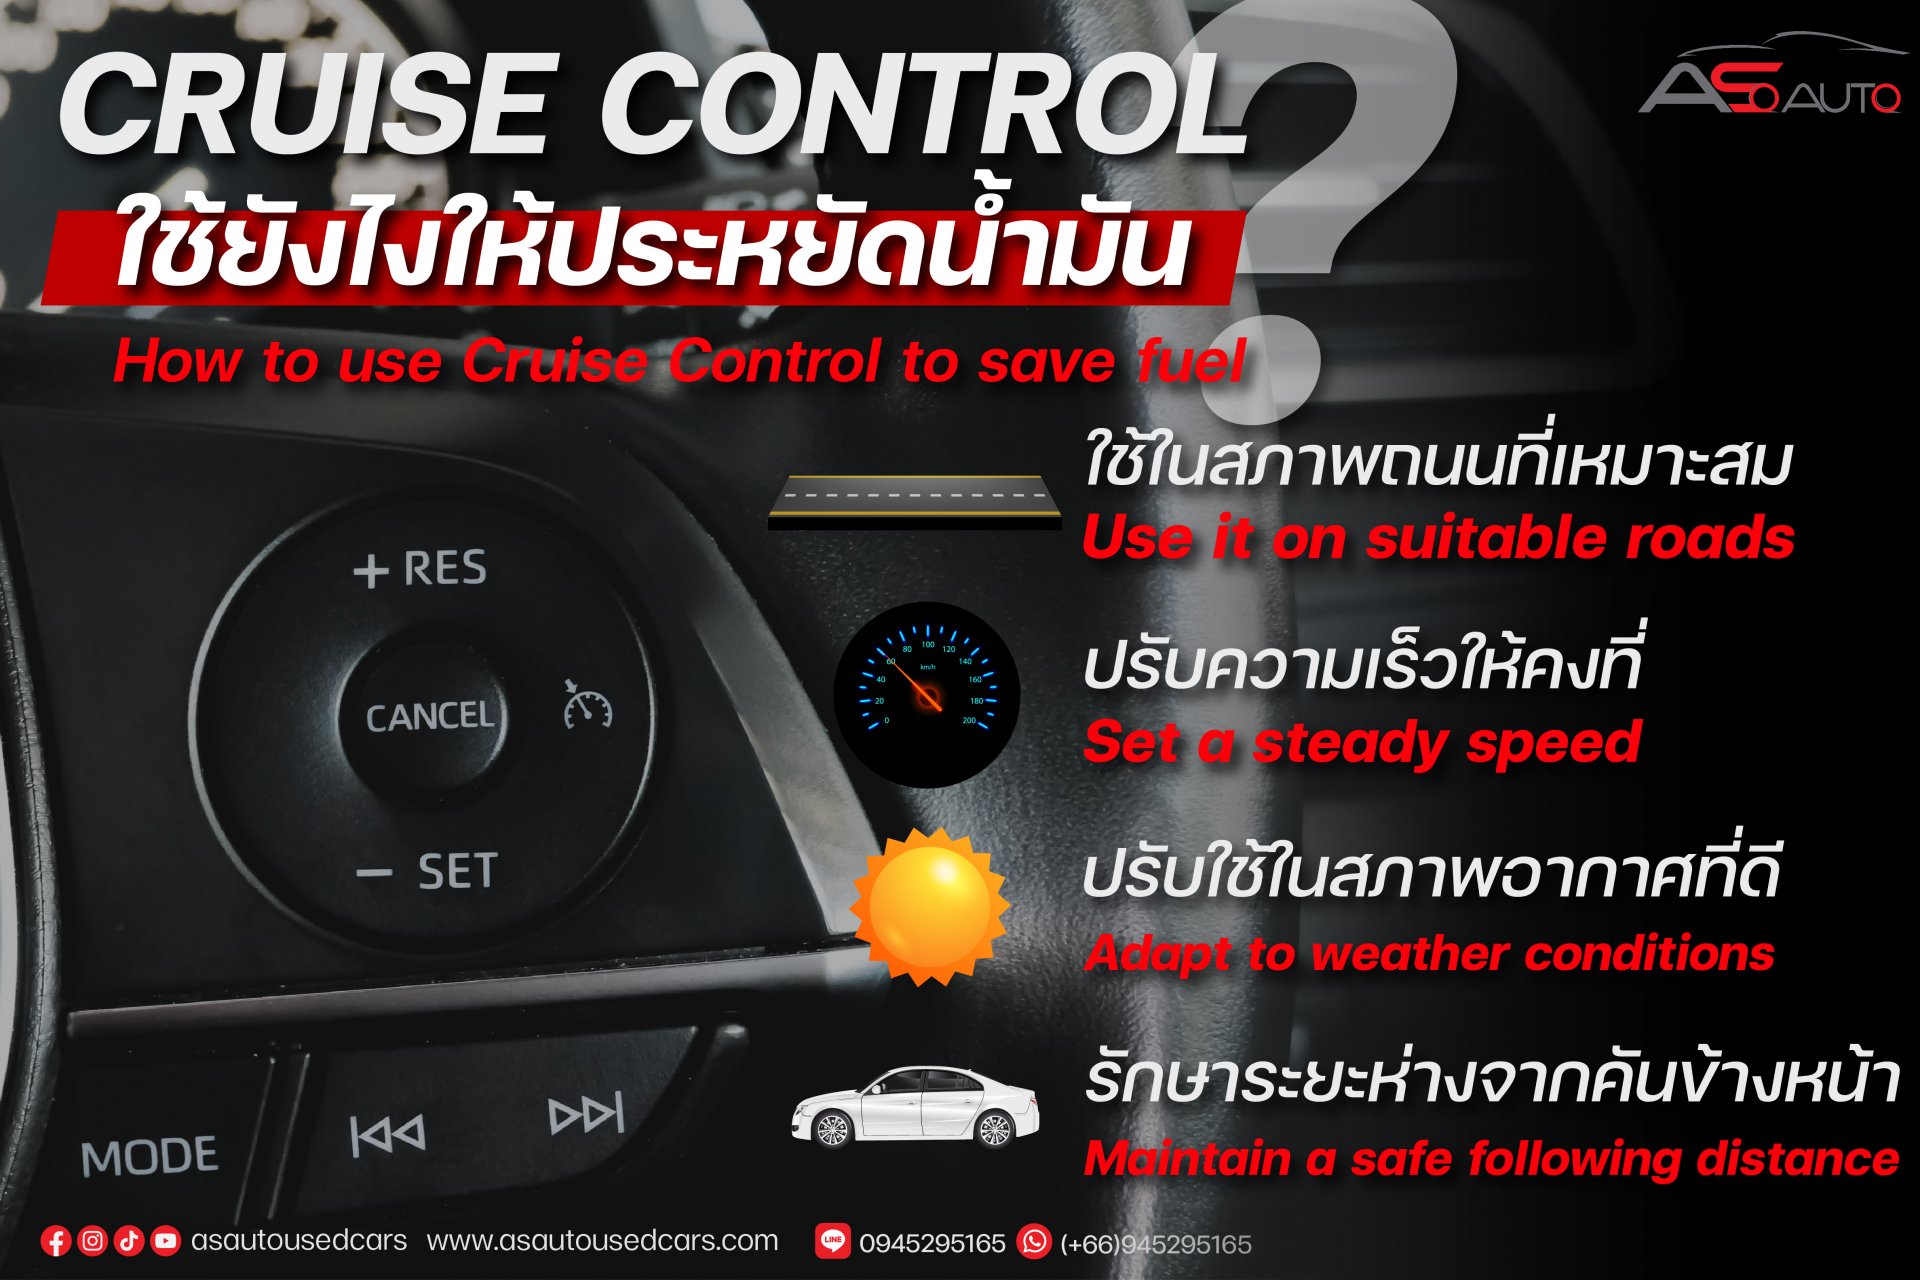 How to use Cruise Control to save fuel?